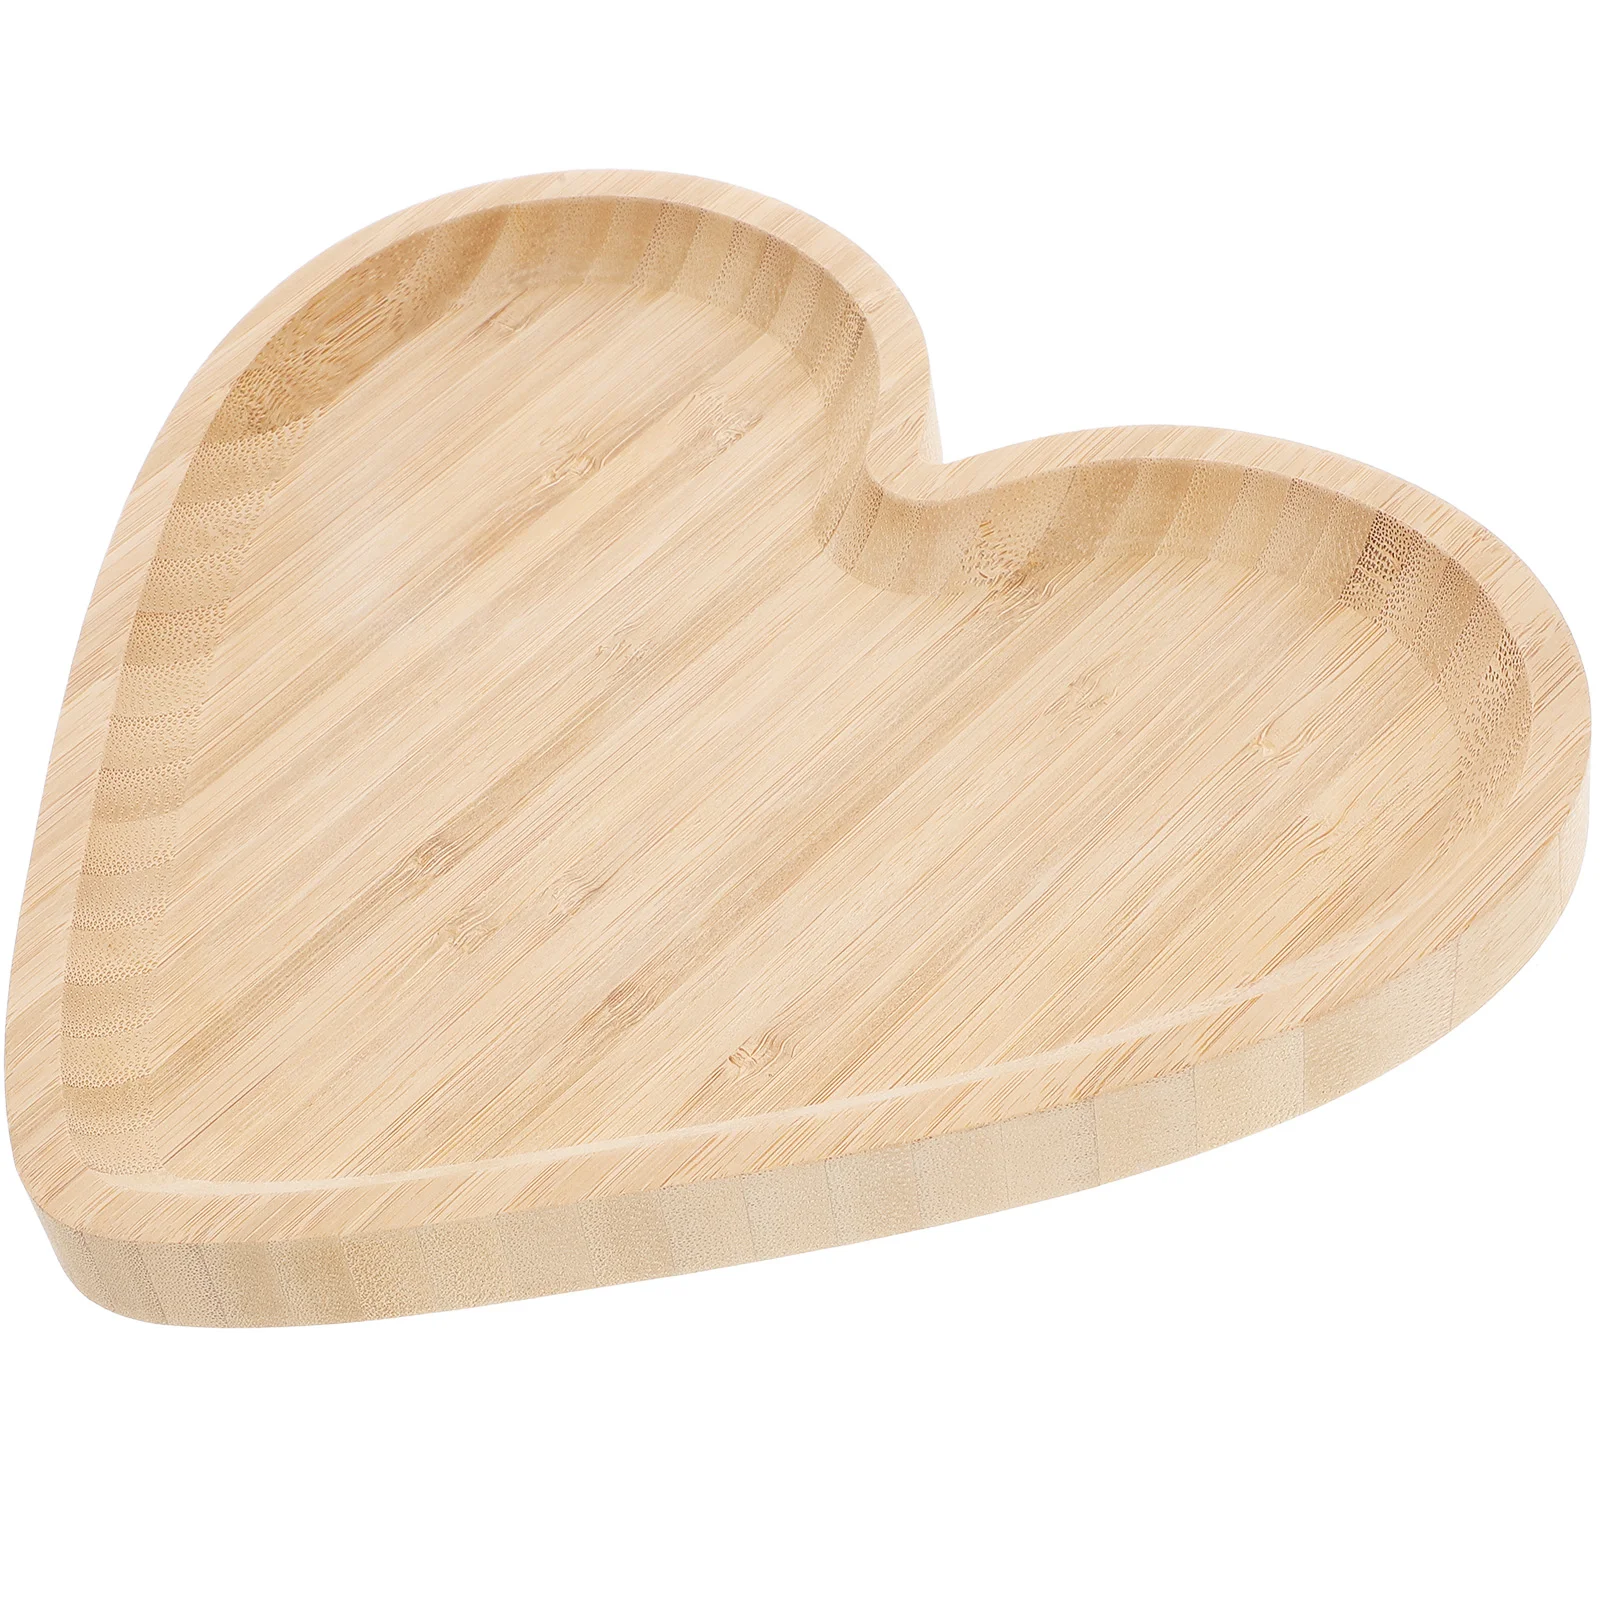 

Tray Heart Plate Serving Wood Wooden Plates Dish Platters Fruits Snack Platter Bread Appetizer Cake Fruit Snacks Nut Candy Dried